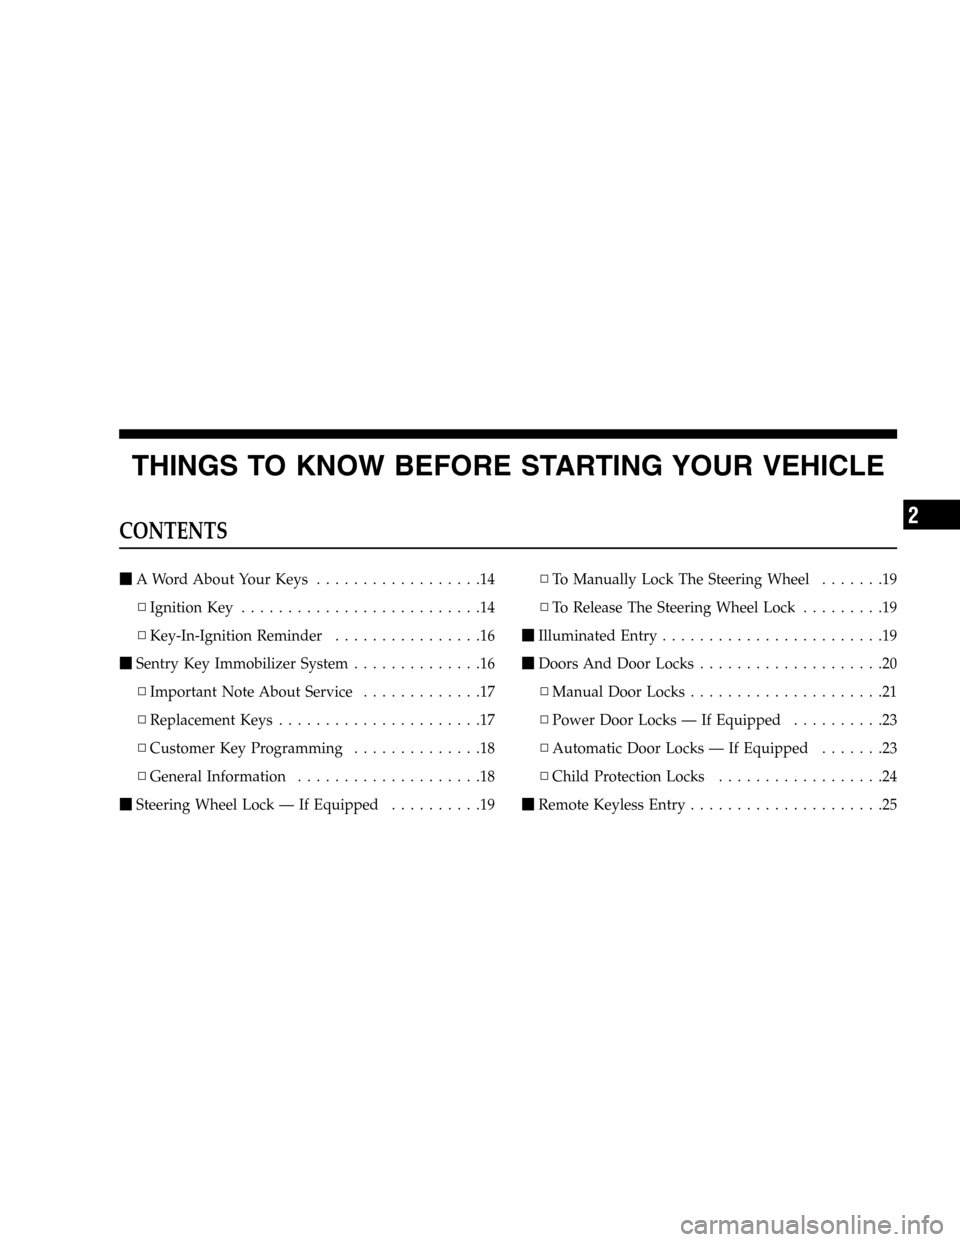 JEEP LIBERTY 2005 KJ / 1.G Owners Manual THINGS TO KNOW BEFORE STARTING YOUR VEHICLE
CONTENTS
A Word About Your Keys..................14
▫Ignition Key..........................14
▫Key-In-Ignition Reminder................16
Sentry Key I